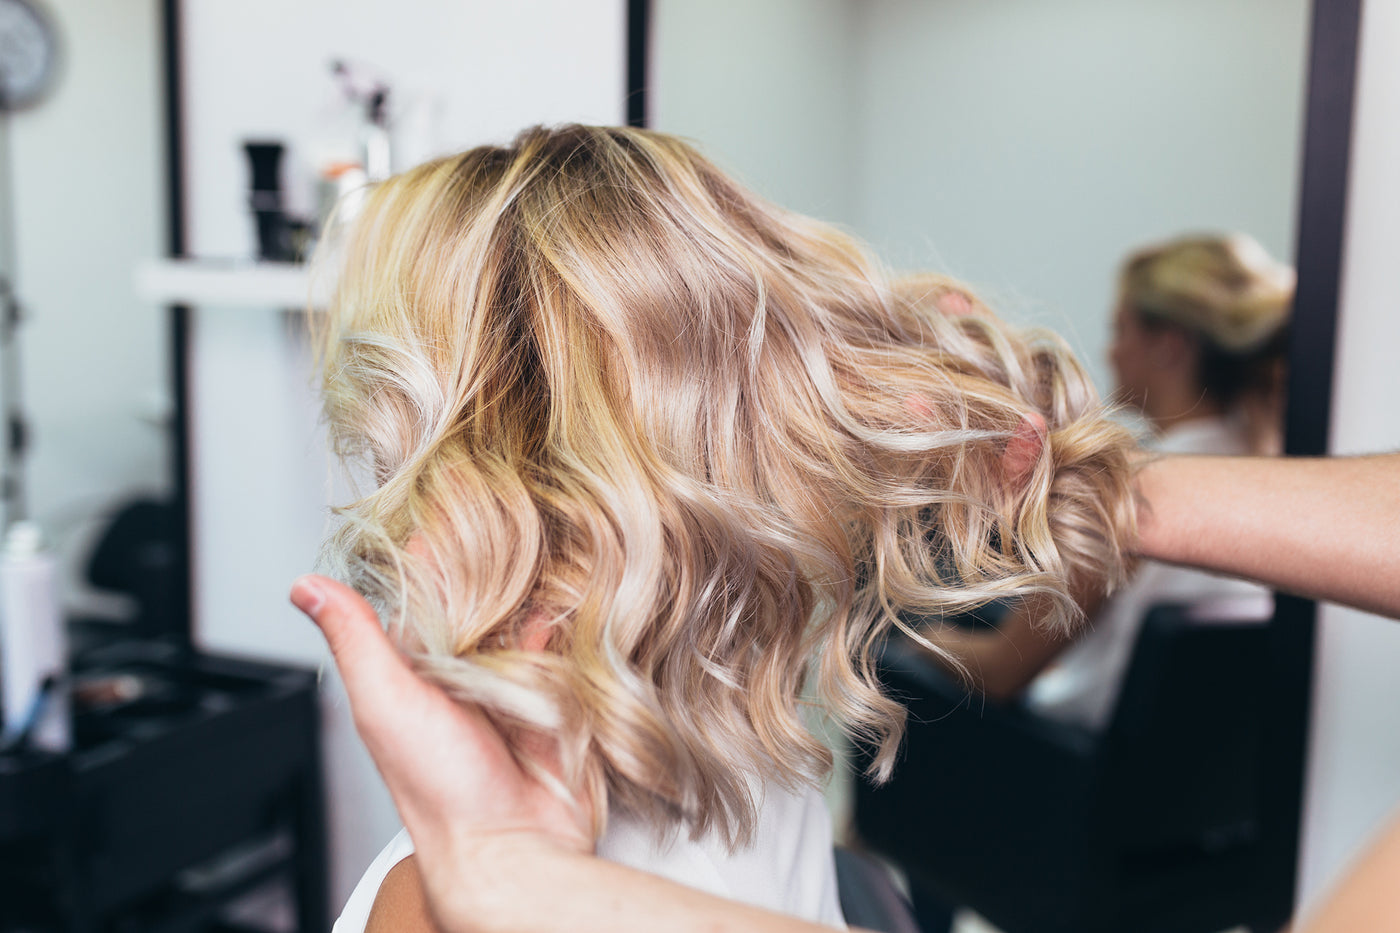 How To Find A Good Hair Stylist